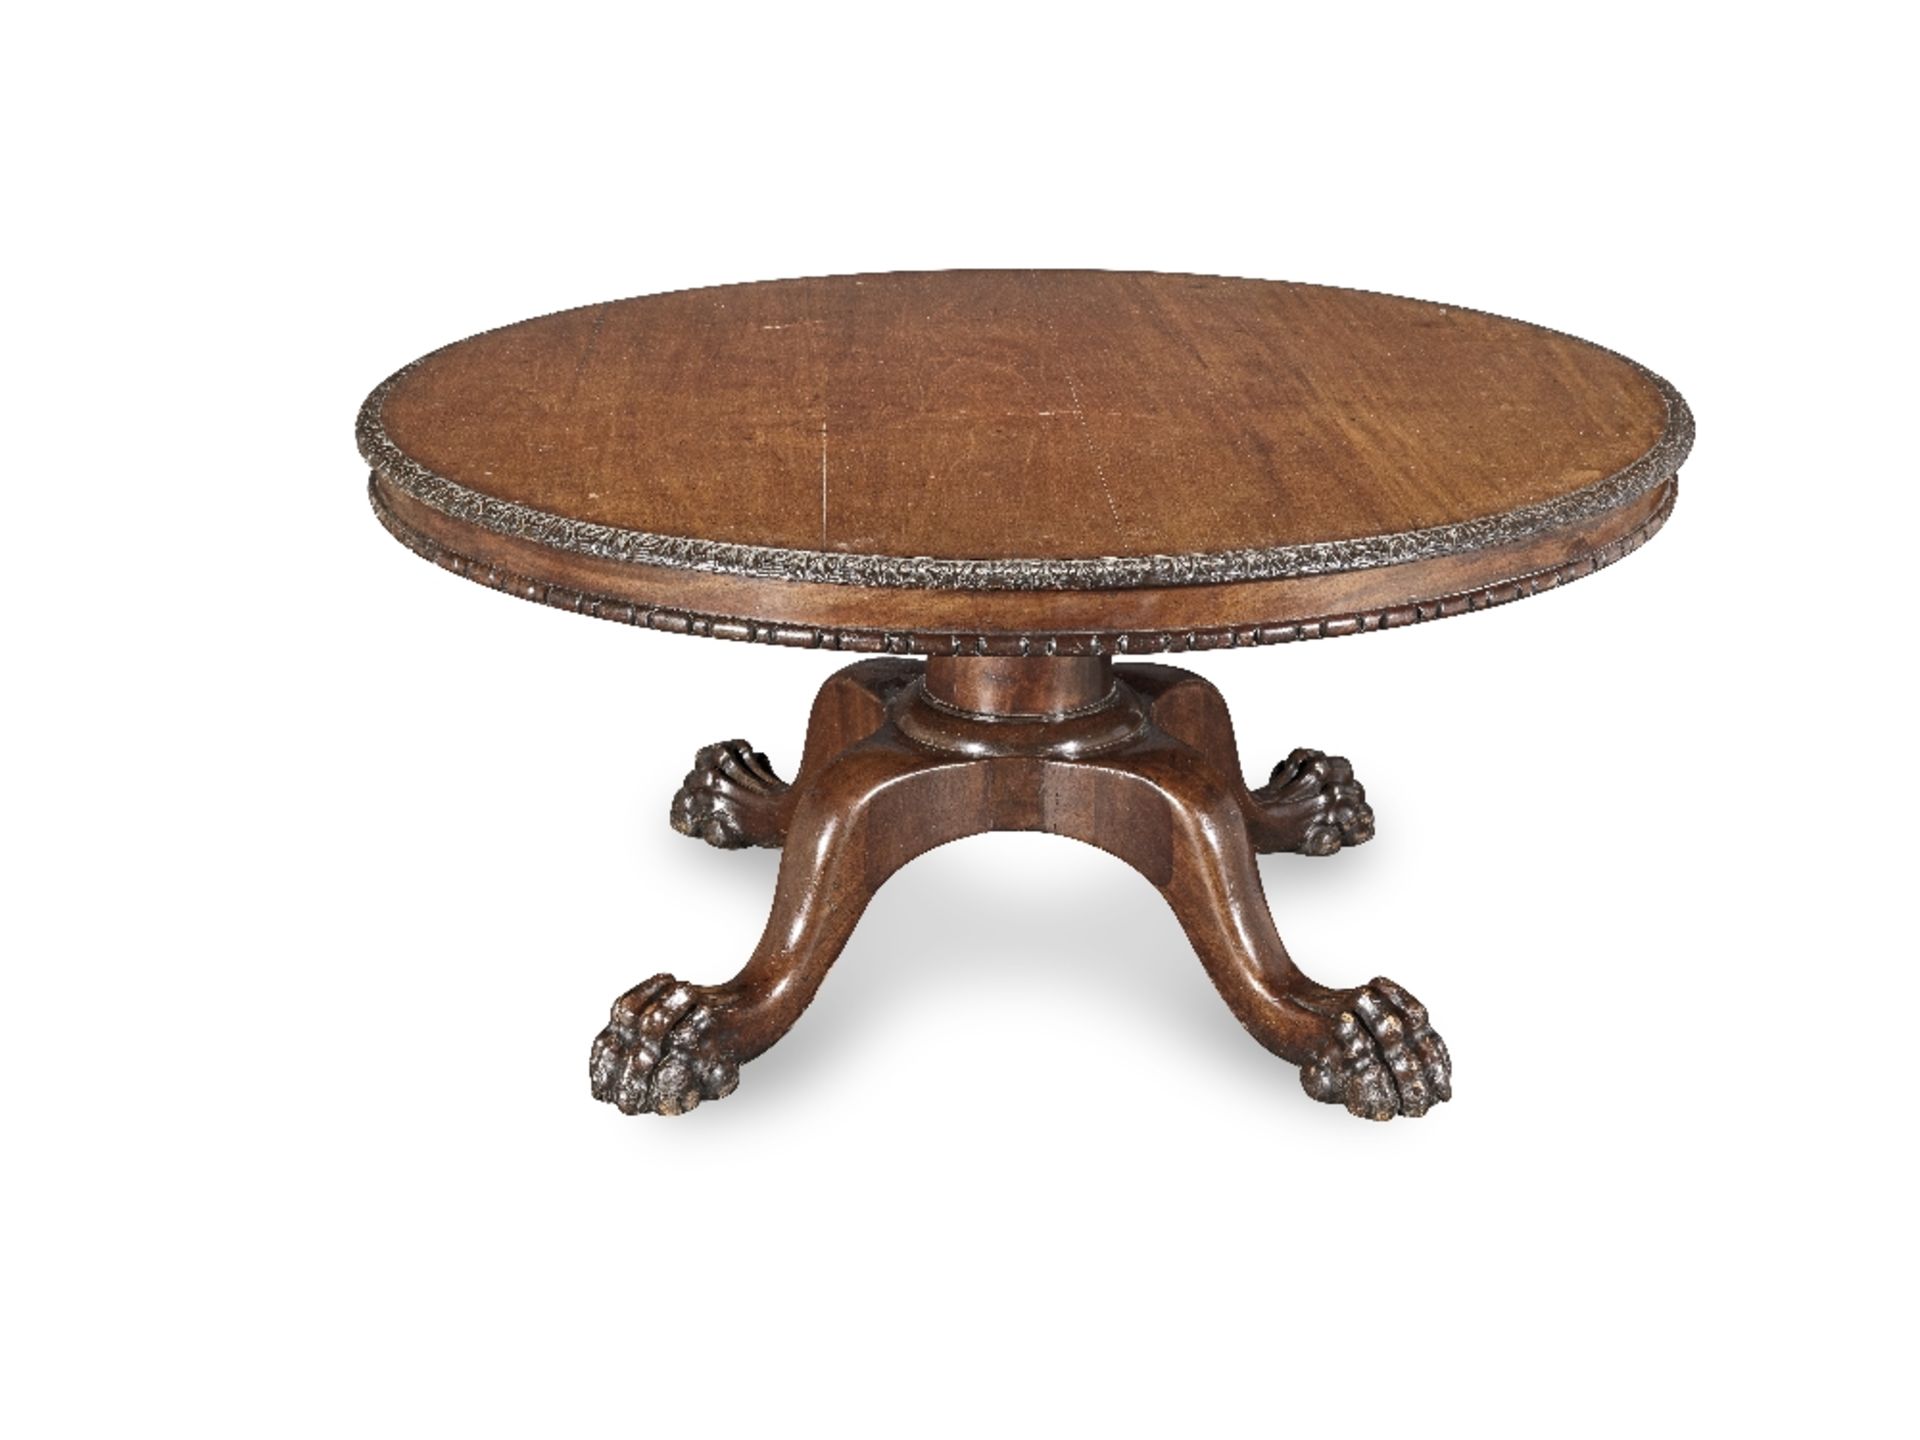 A large William IV or early Victorian mahogany centre table 1835-1845, possibly Irish